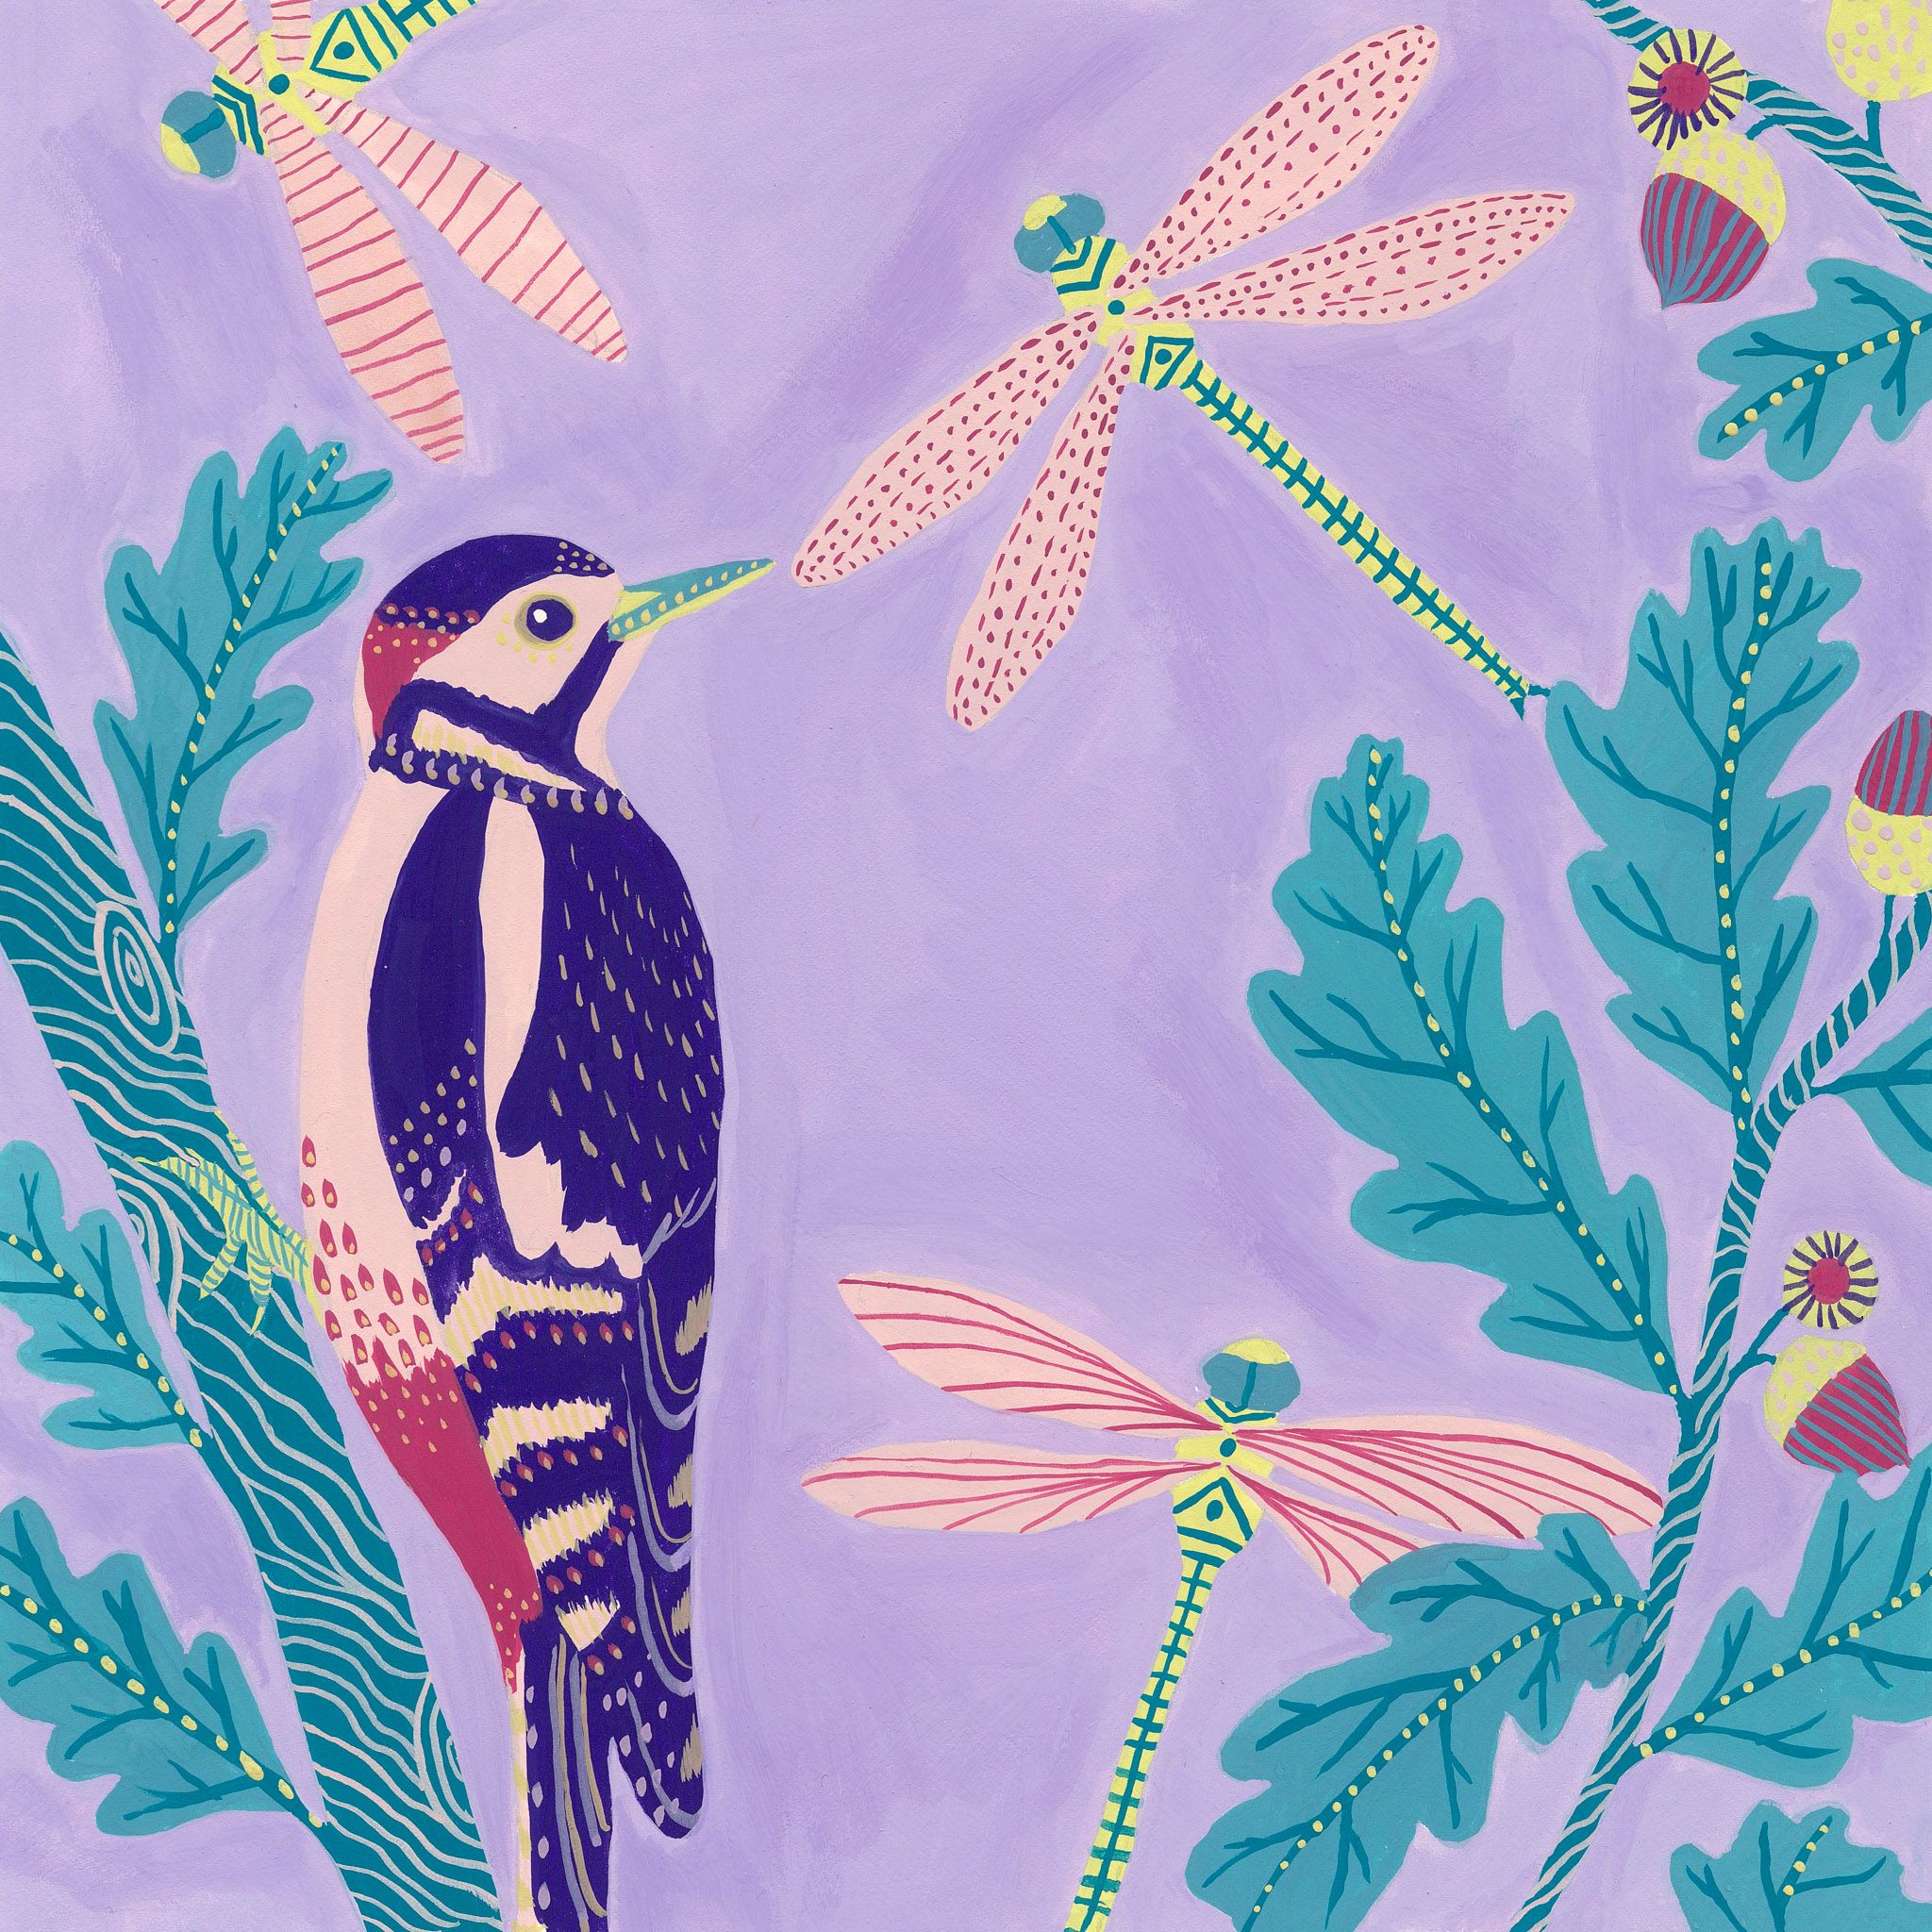 Woodpecker Among Dragonflies by Jenny Evans